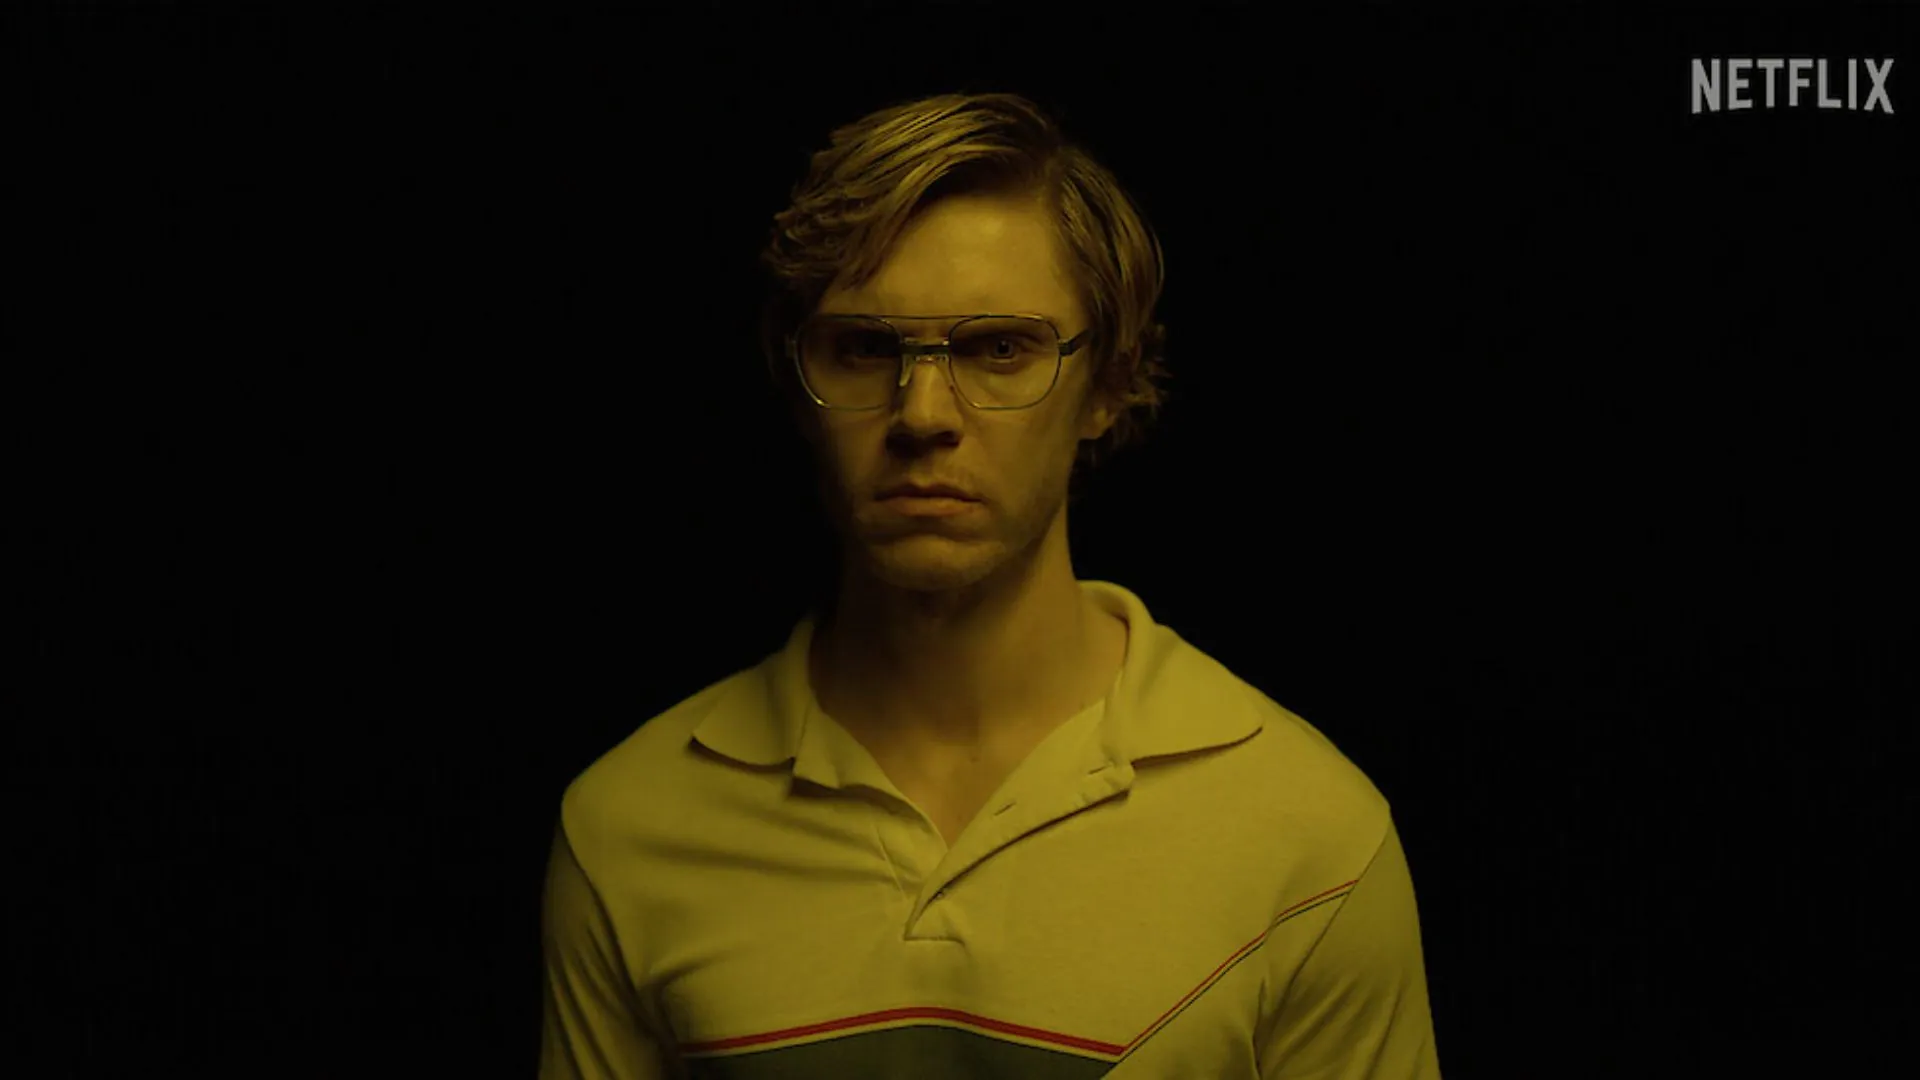 DAHMER Netflix’s second biggest English-language series of all time